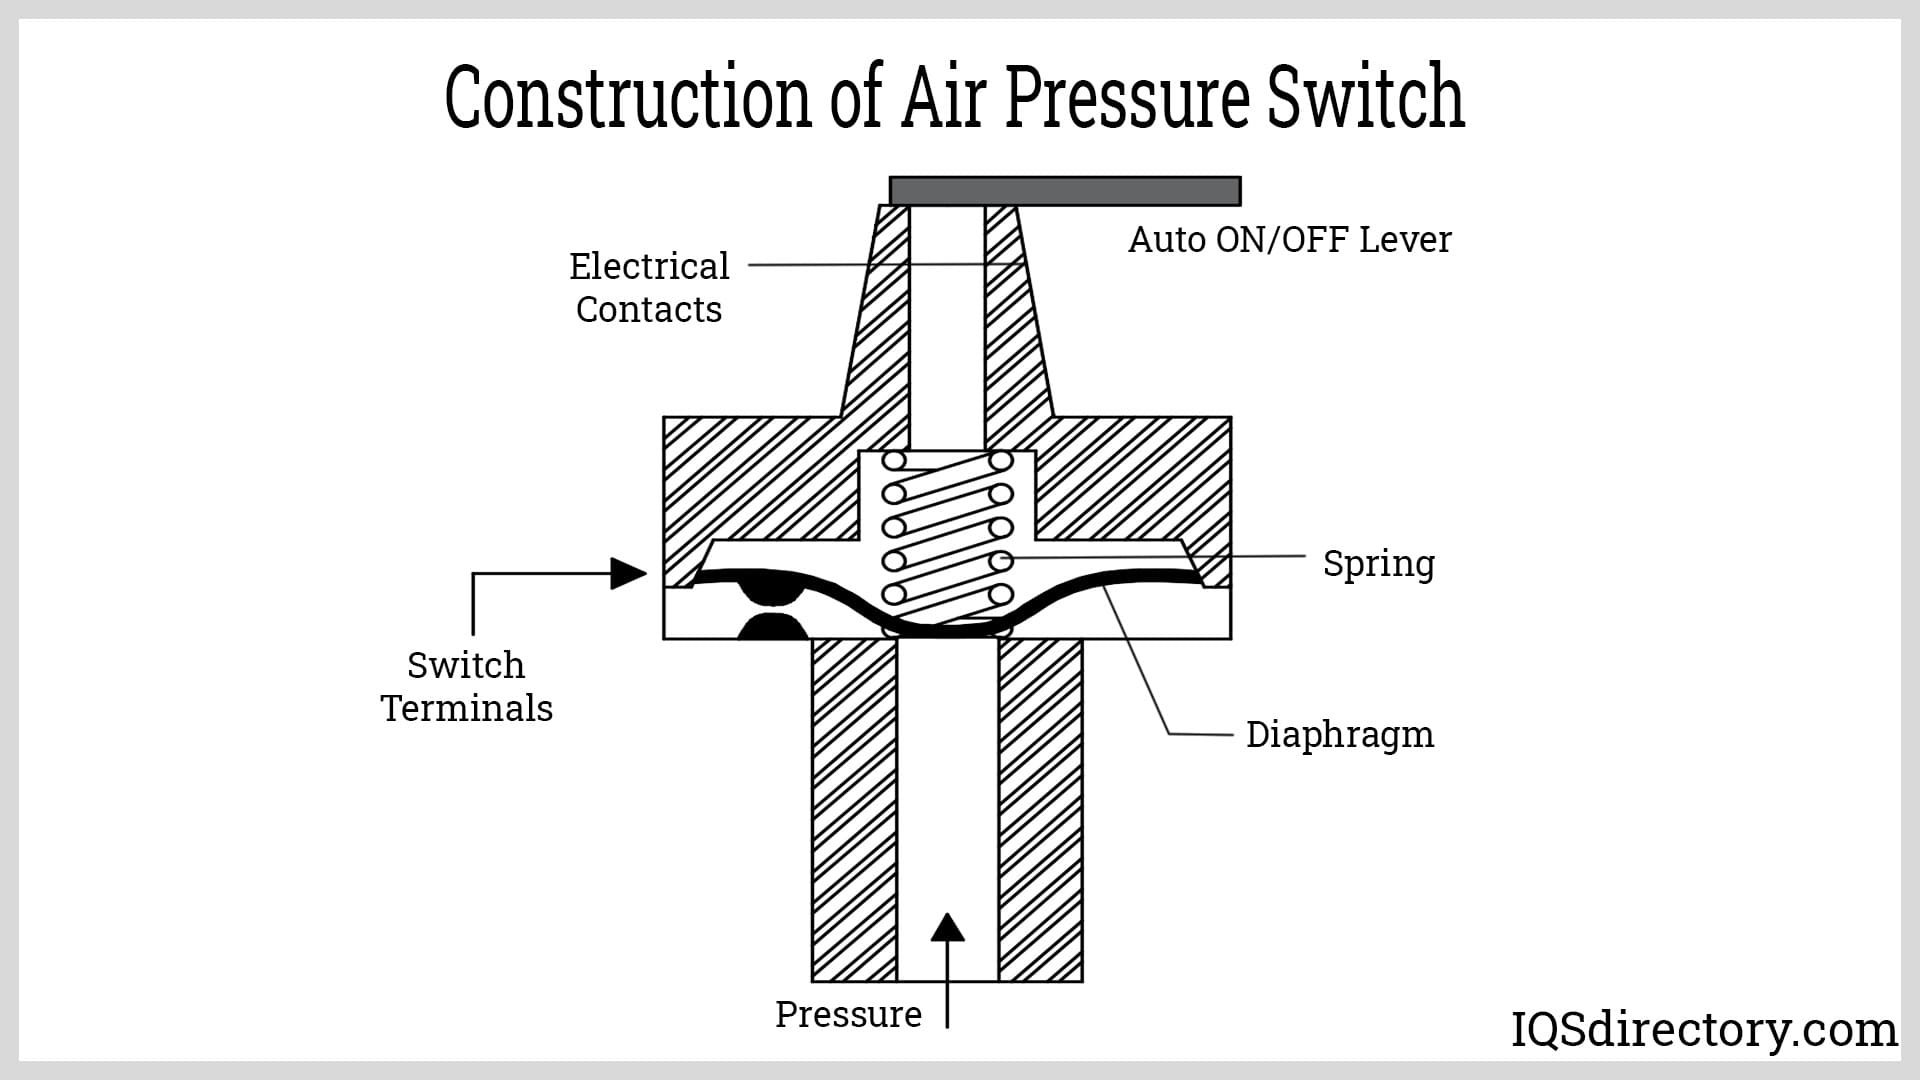 Construction of Air Pressure Switch